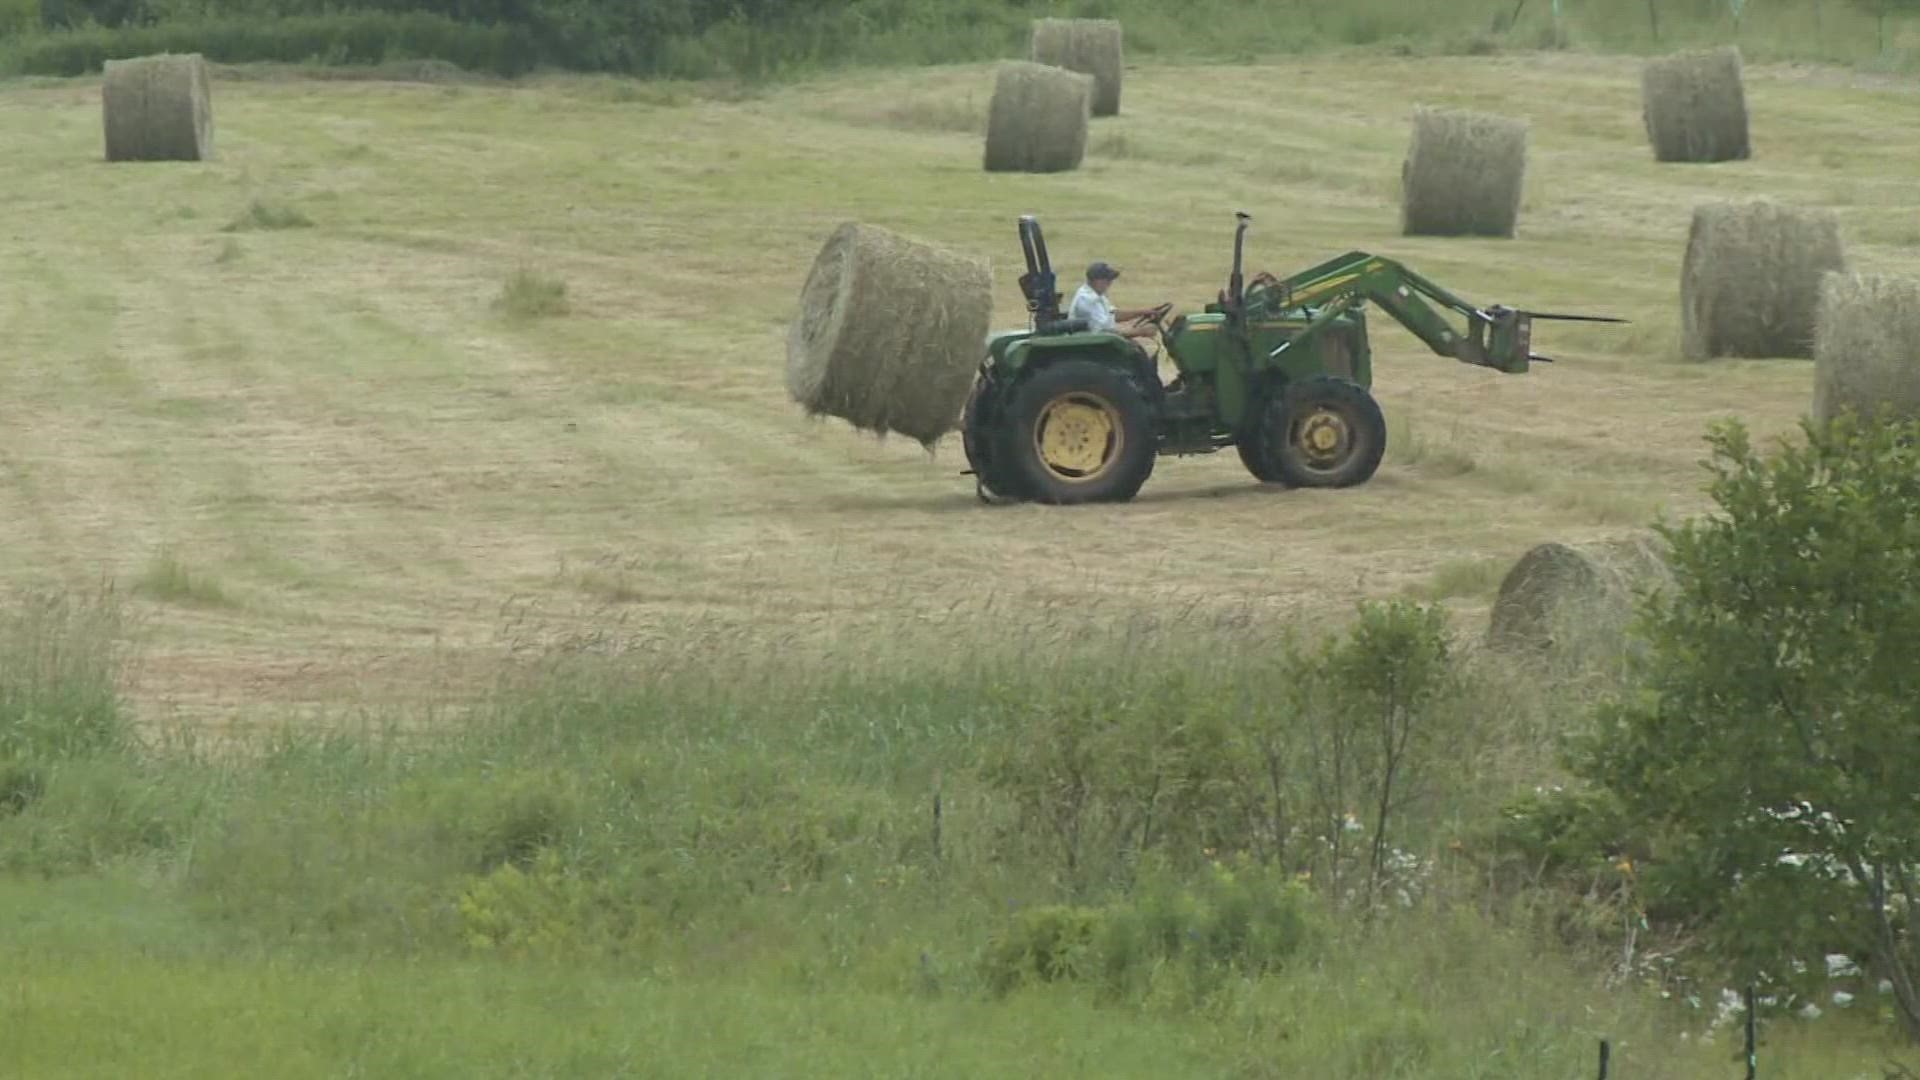 Sen. Susan Collins, R-Maine, plans to introduce a bill that would provide financial assistance to impacted farmers.